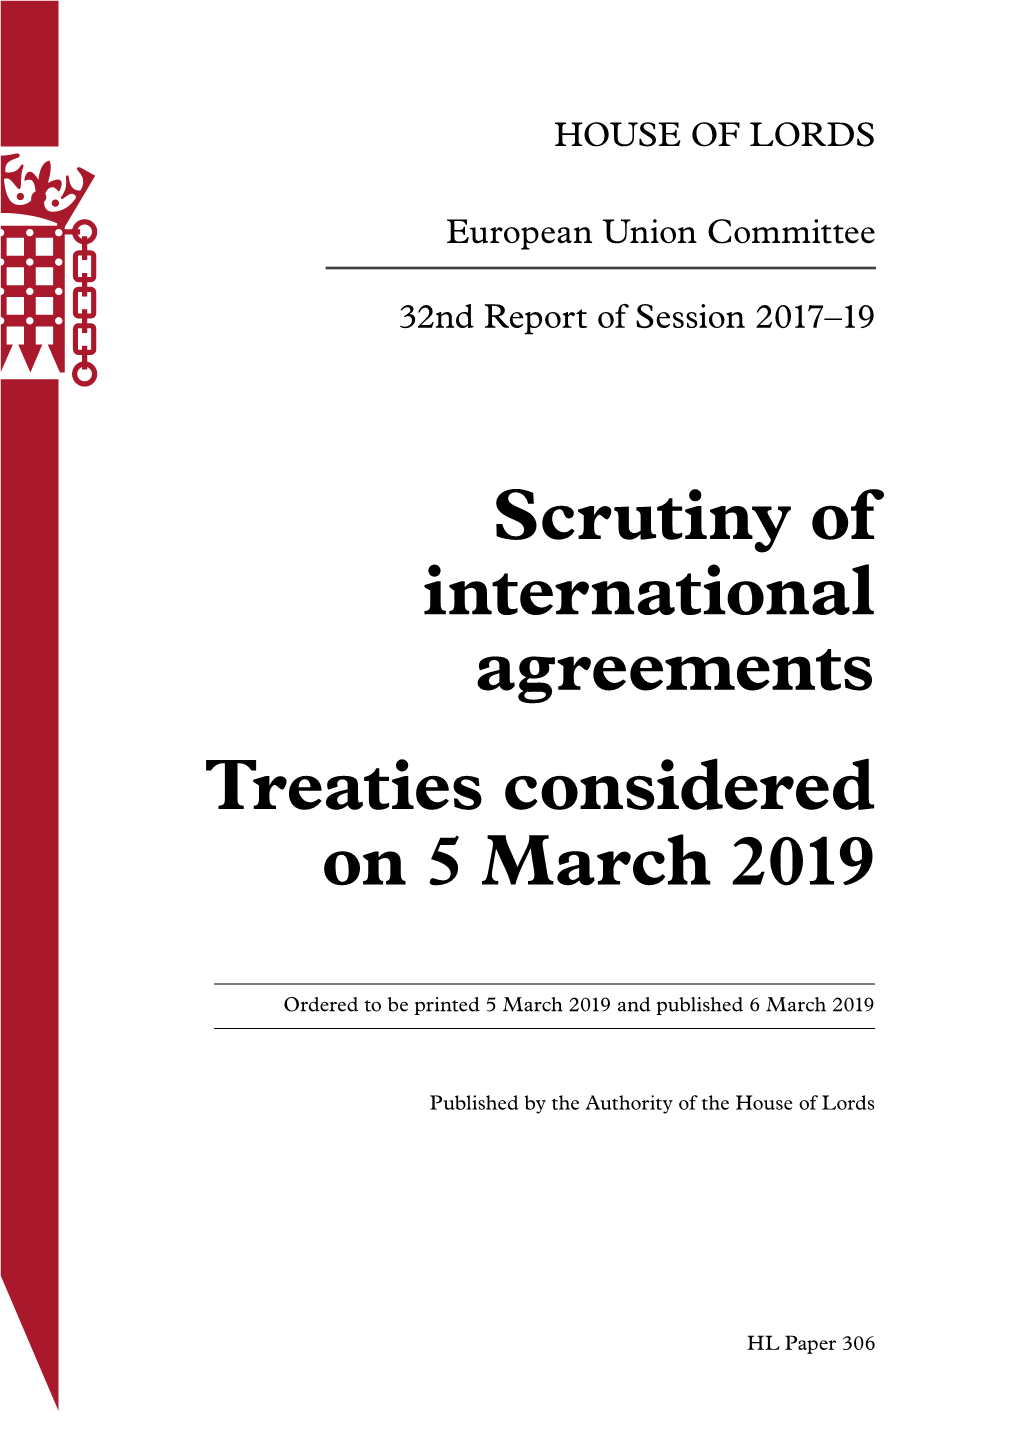 Scrutiny of International Agreements Treaties Considered on 5 March 2019